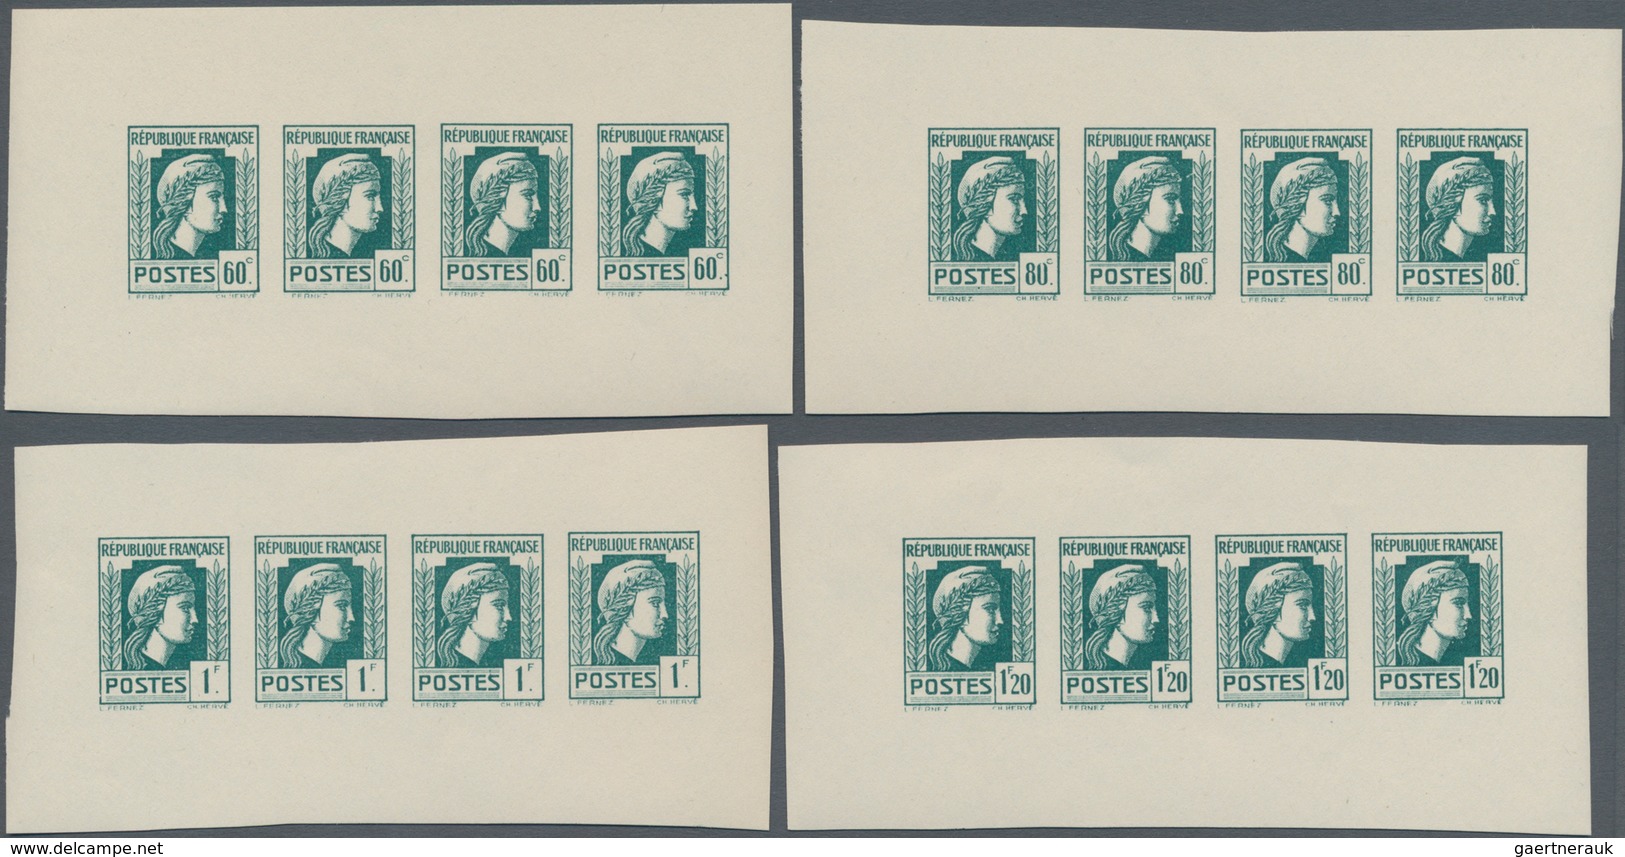 Frankreich: 1944, Definitives "Marianne", Not Issued, Group Of Ten Imperforated Panes Of Four Stamps - Ungebraucht